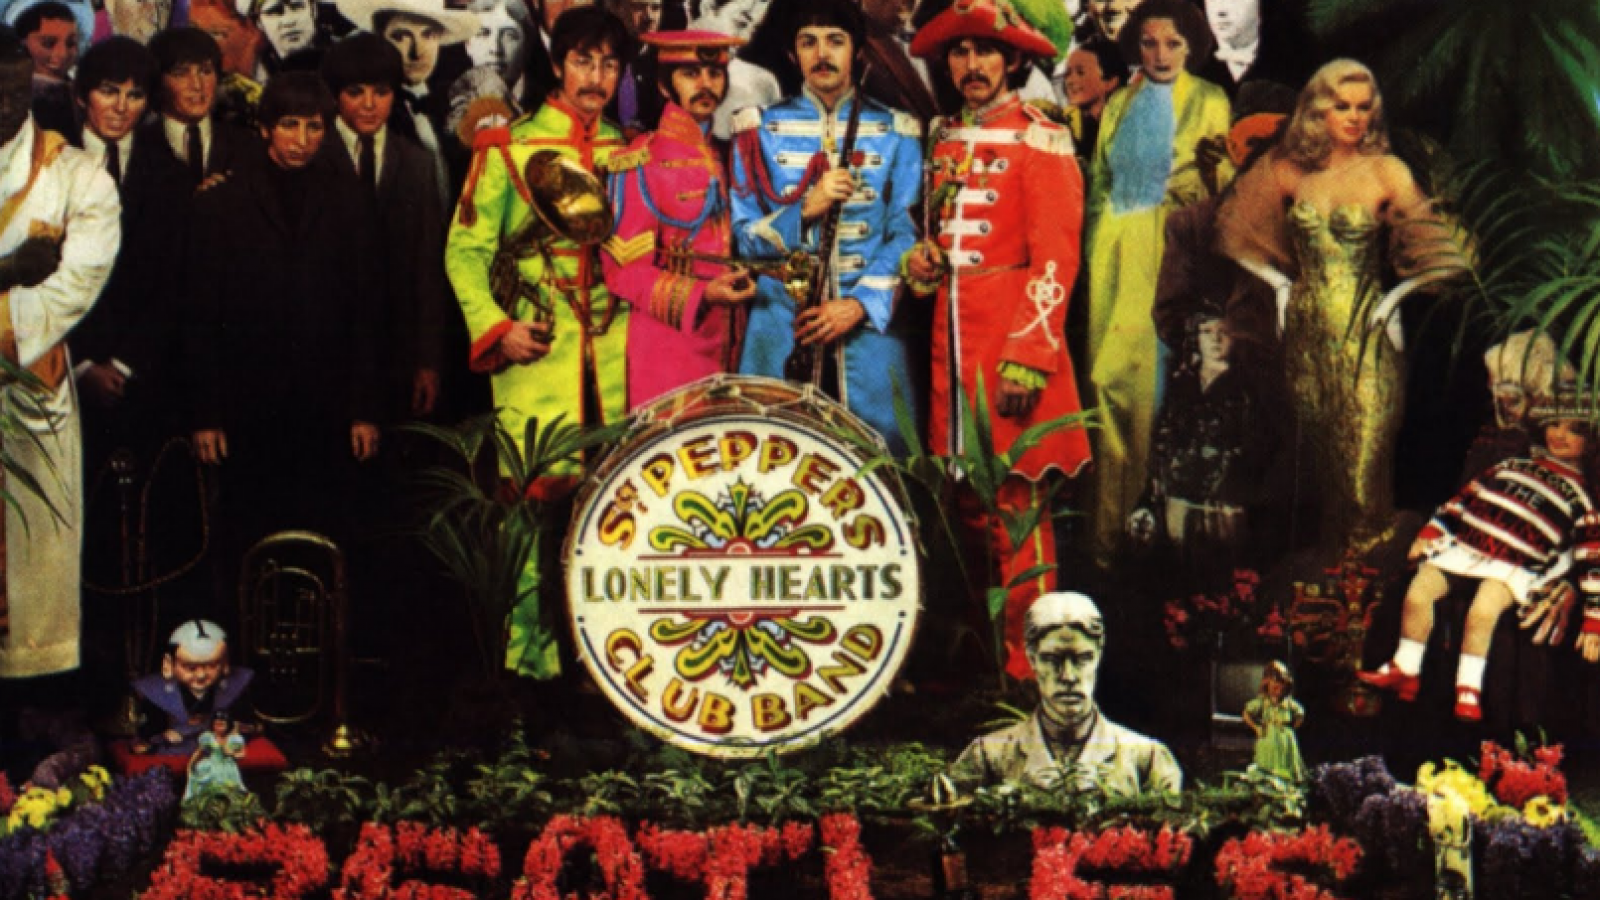 Sgt. Pepper's Lonely Hearts Club Band' at 50: Every Song Ranked